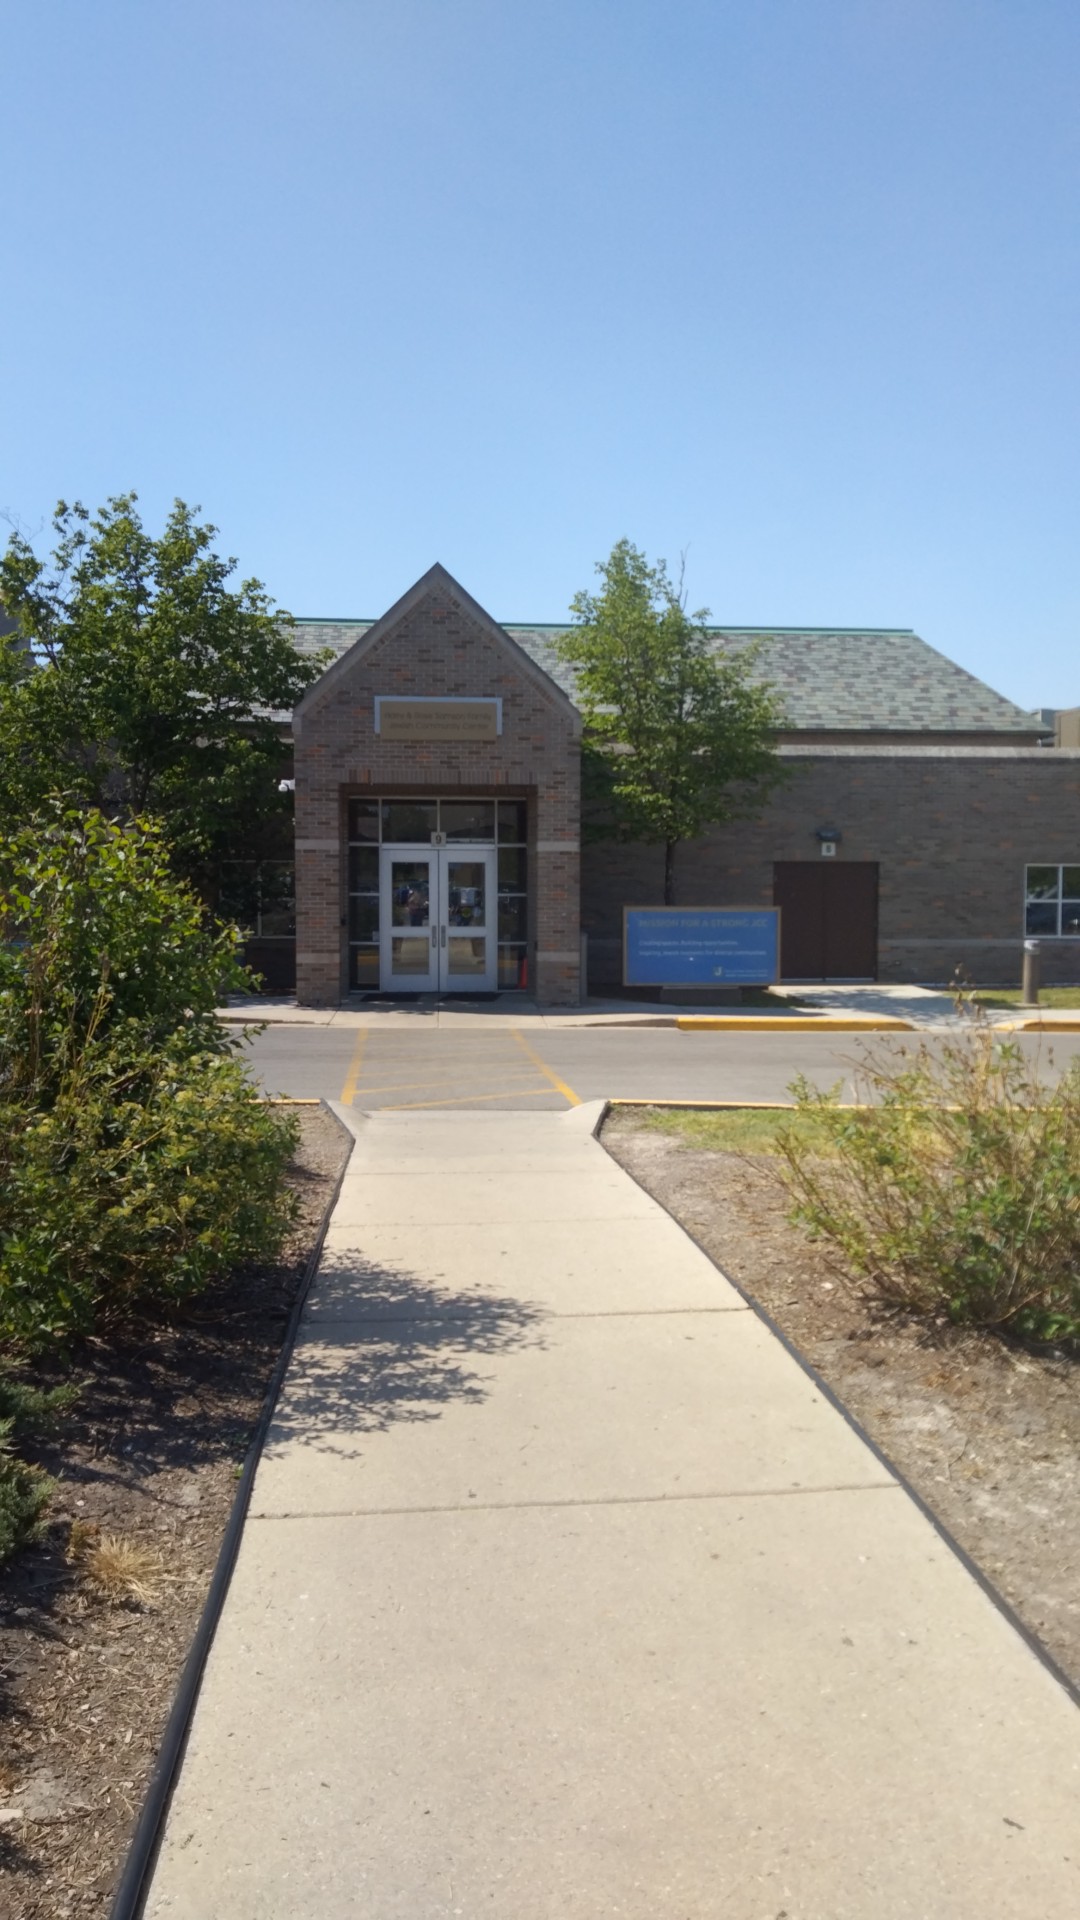 Froedtert & the Medical College of Wisconsin Rehabilitation Clinic, located within the JCC 6255 N Santa Monica Blvd, Whitefish Bay Wisconsin 53217